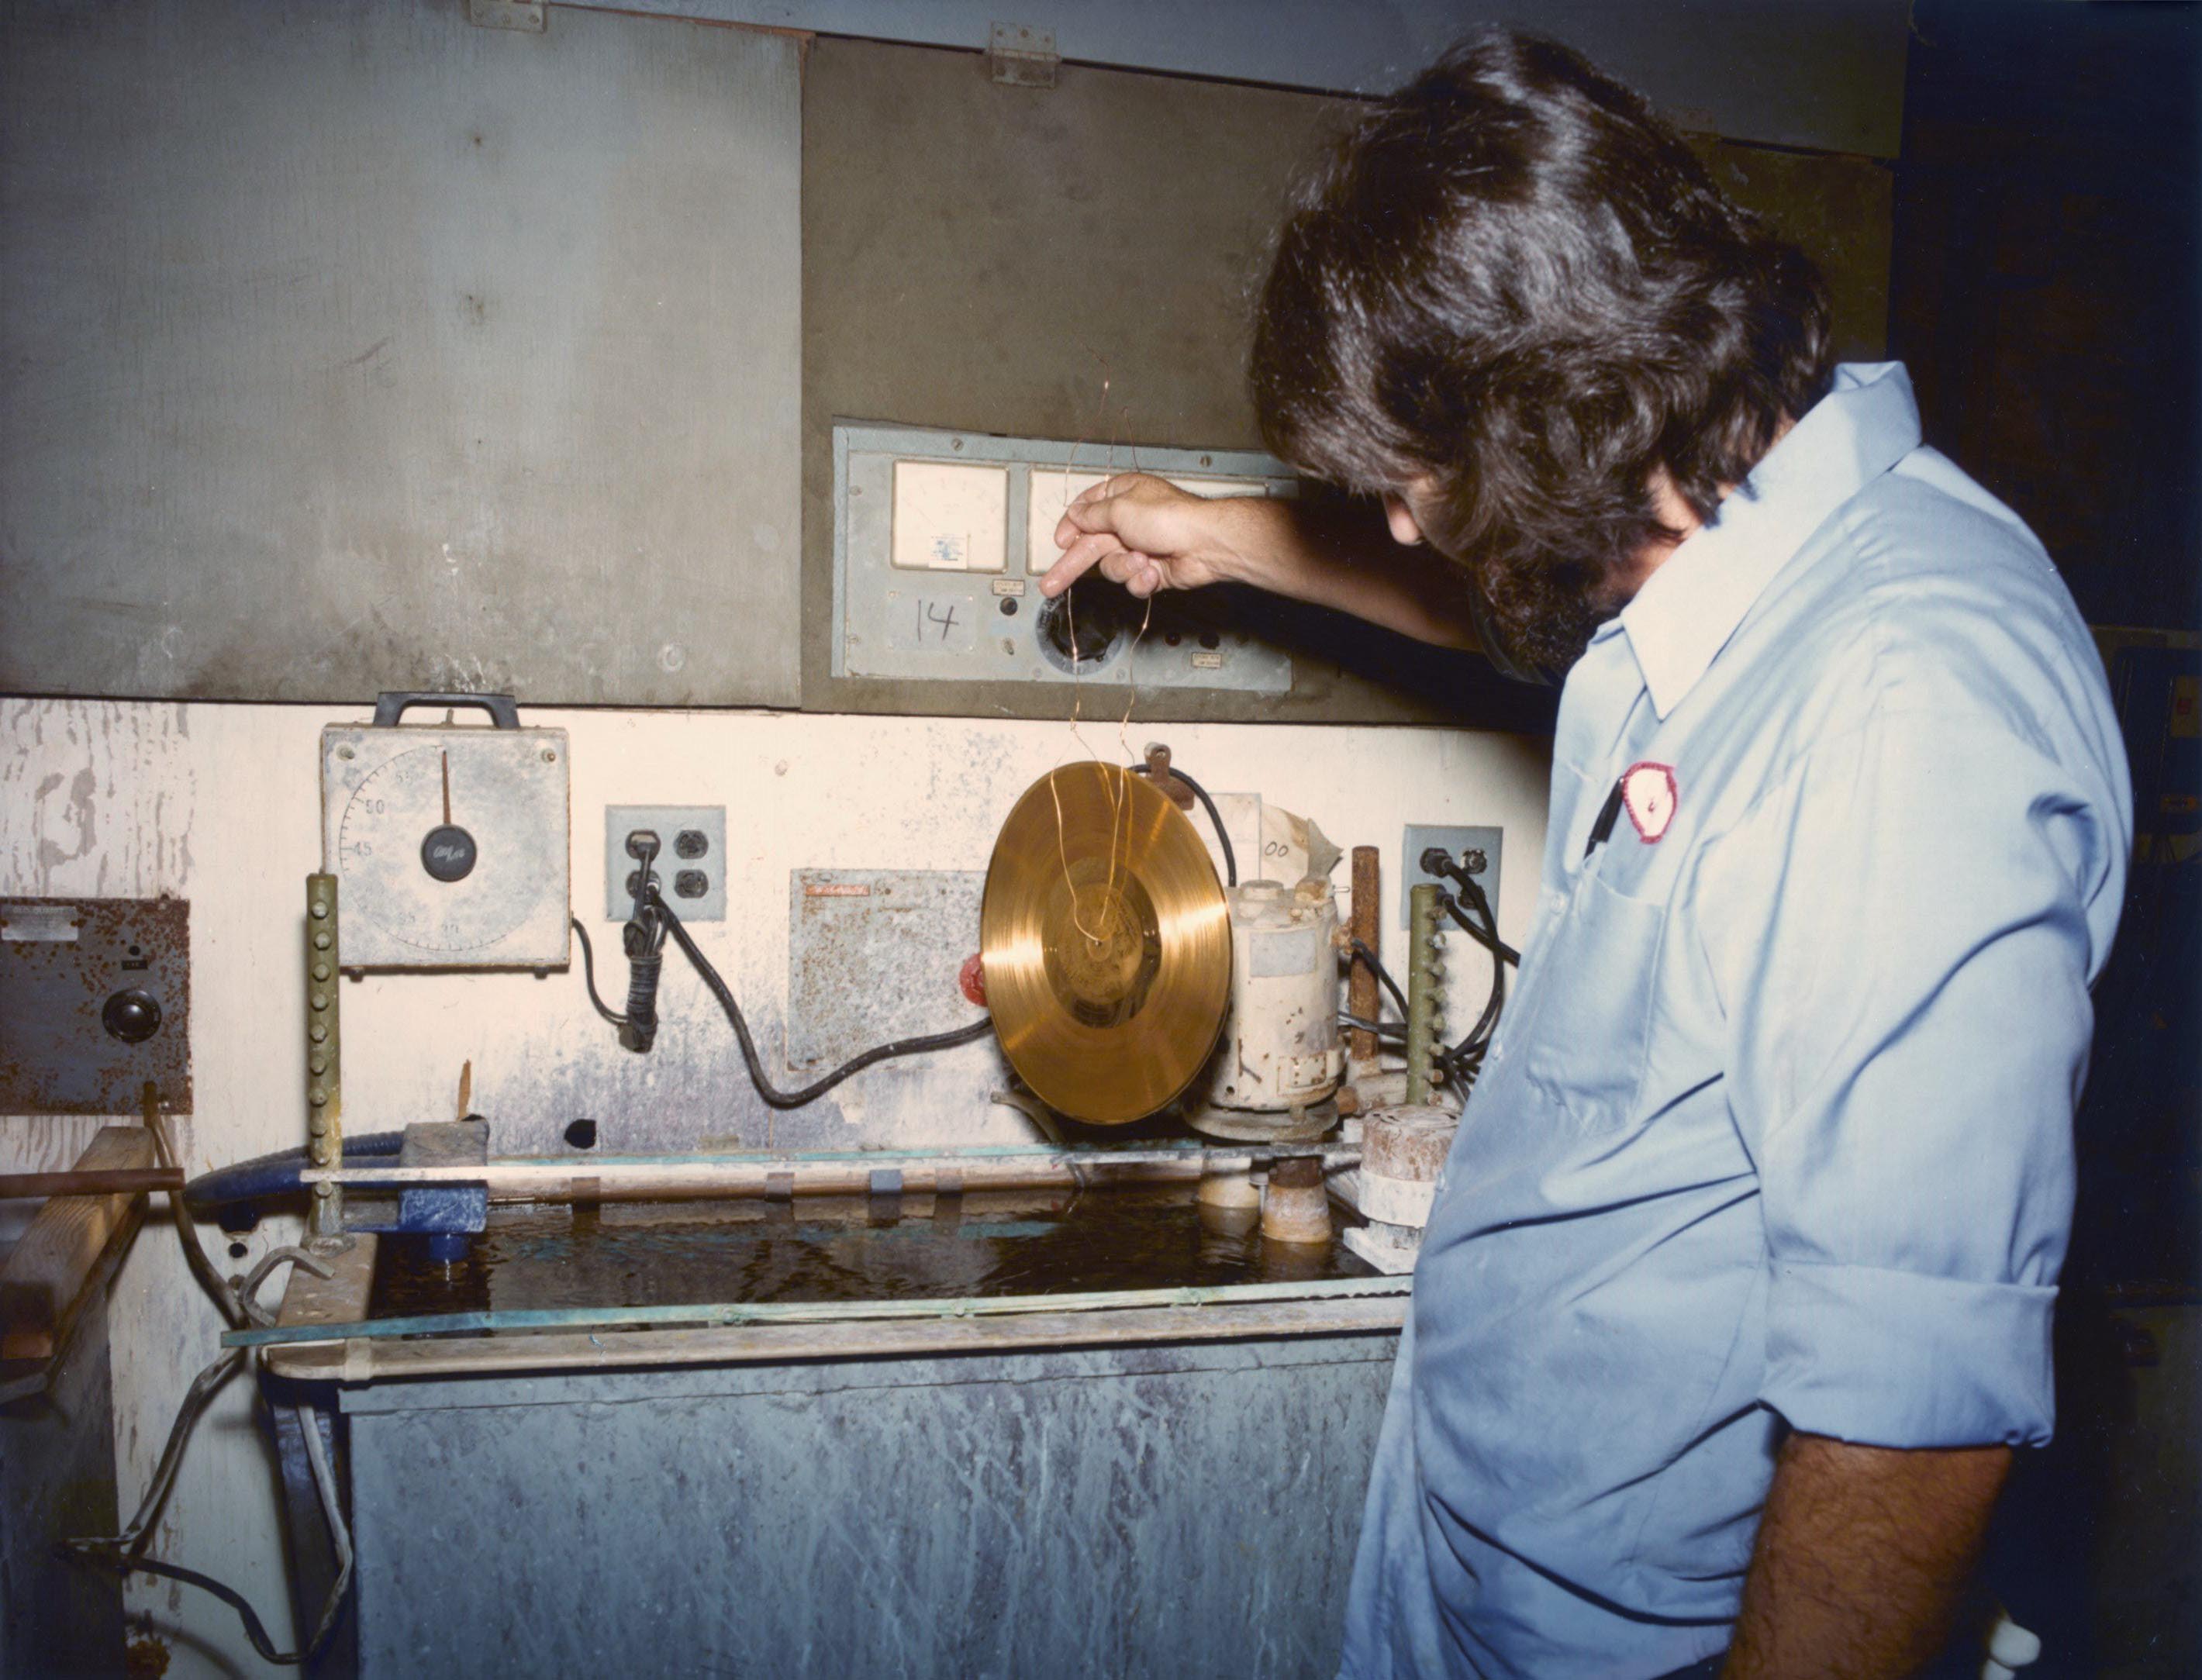 A man lifts the Voyager Golden Record from a sink-sized chemical vat.